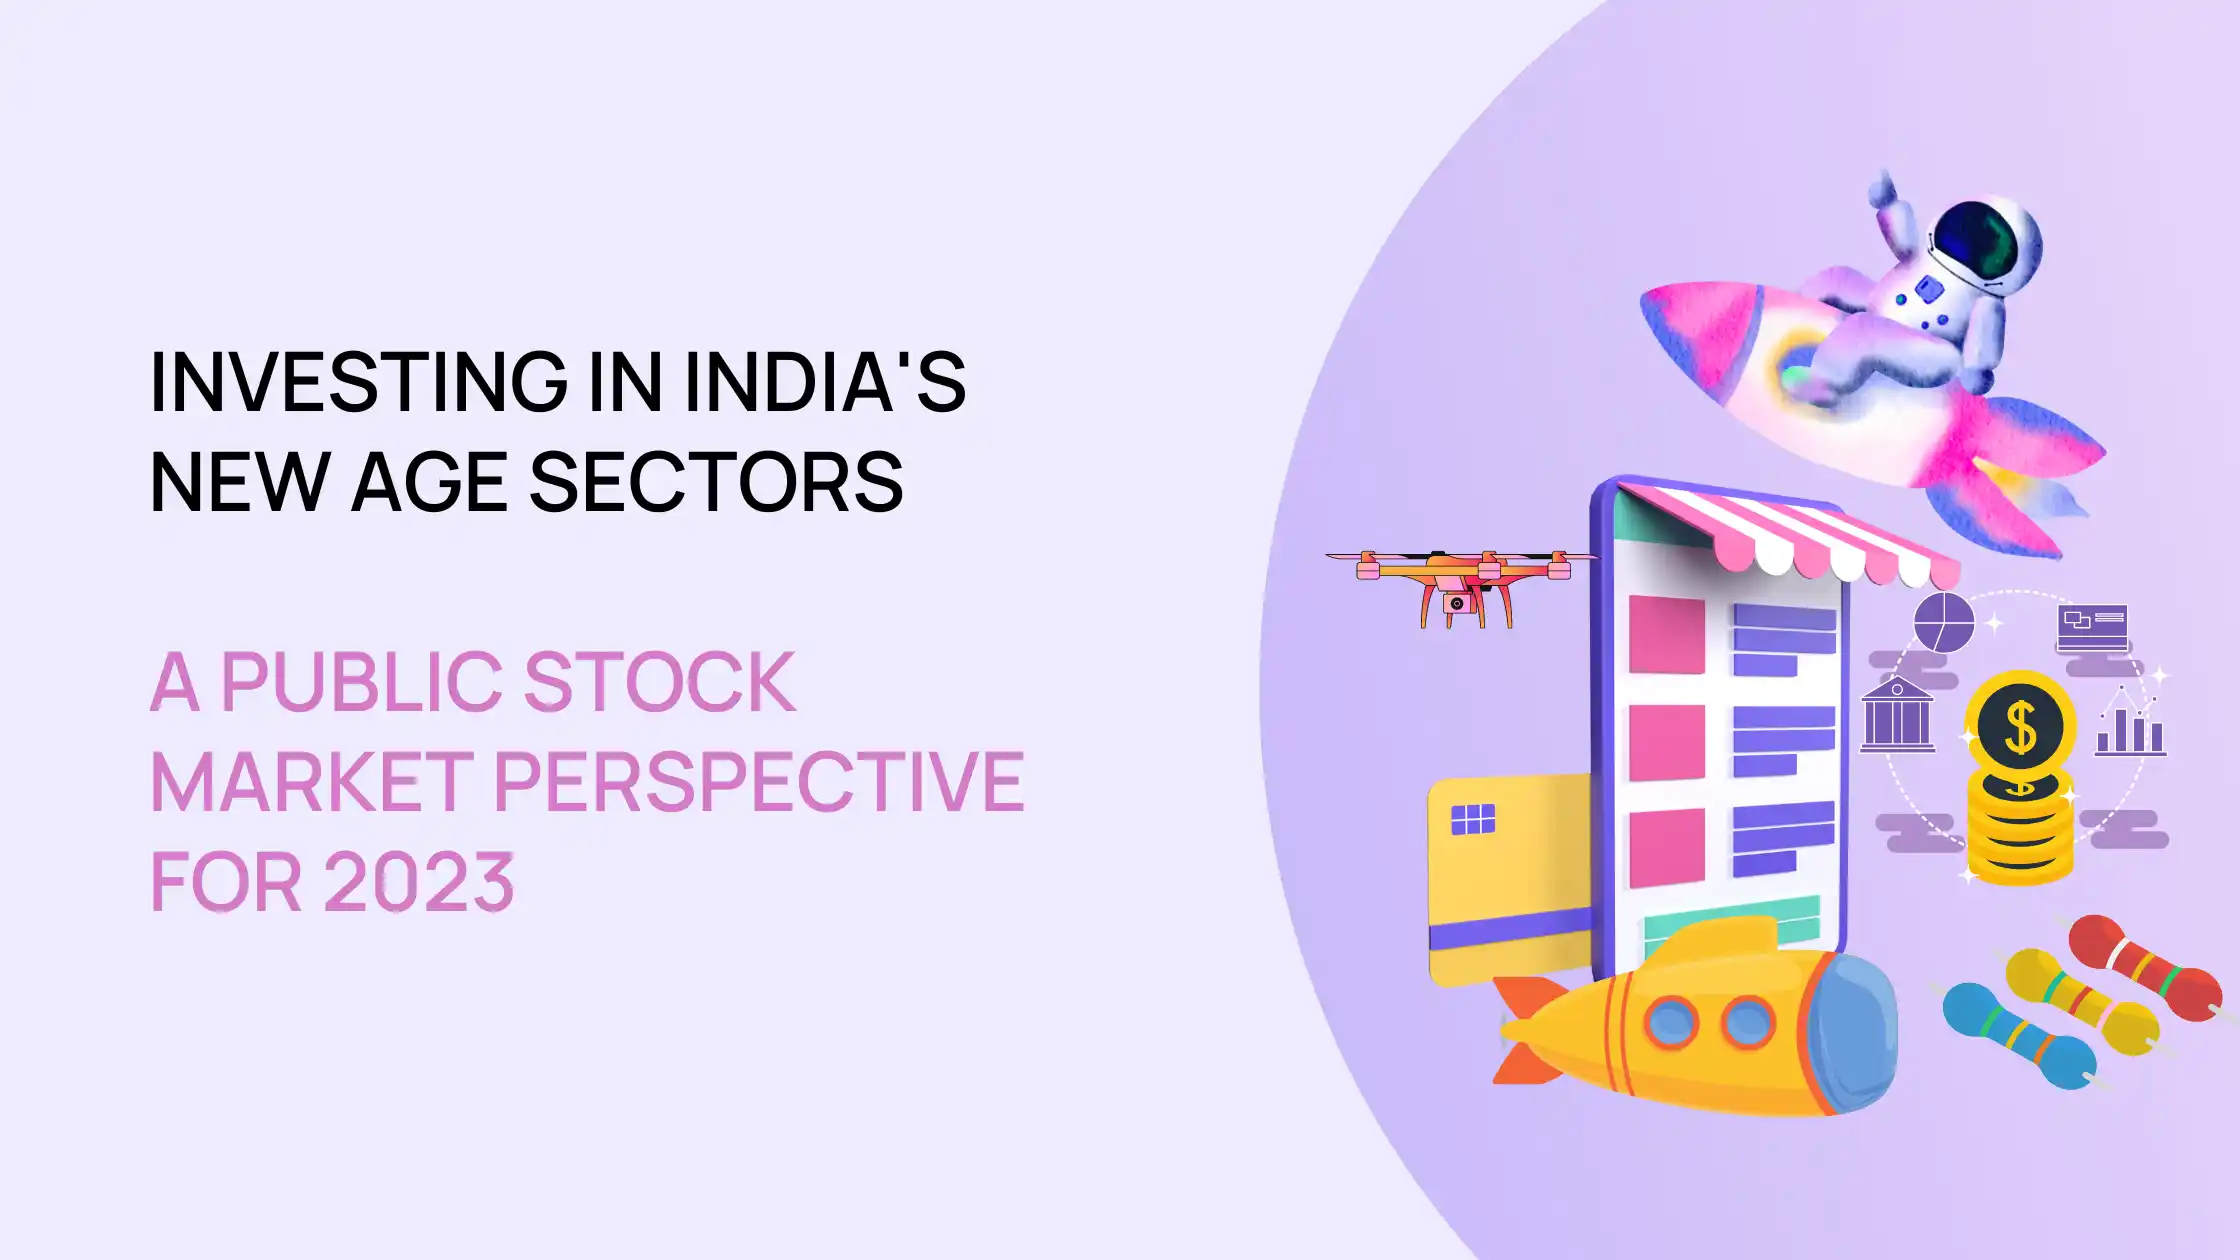 Investing in India's New Age Sectors: A Public Stock Market Perspective for 2023